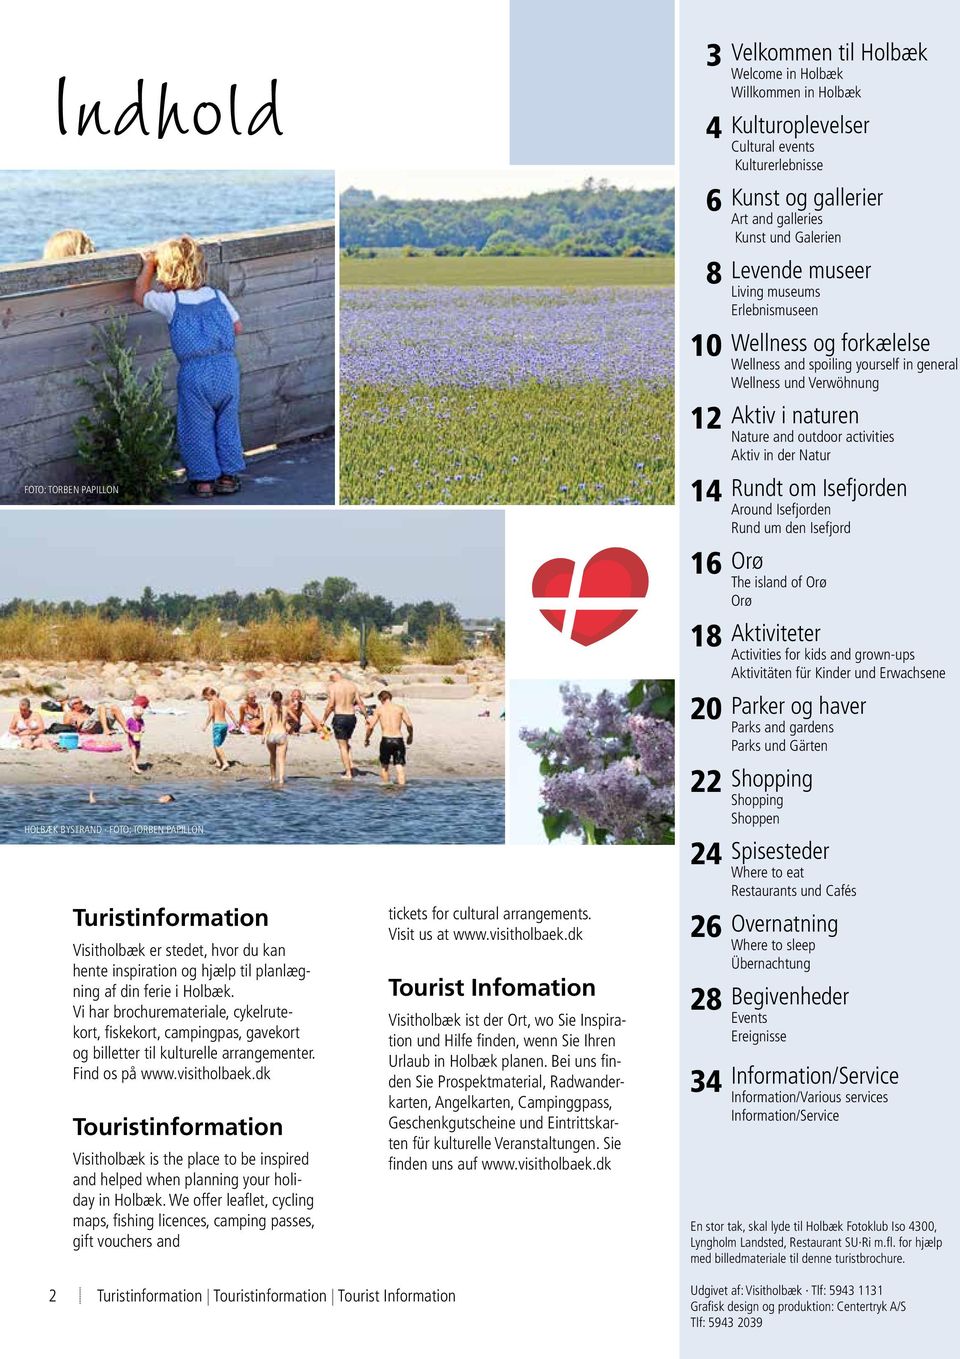 dk Touristinformation Visitholbæk is the place to be inspired and helped when planning your holiday in Holbæk.